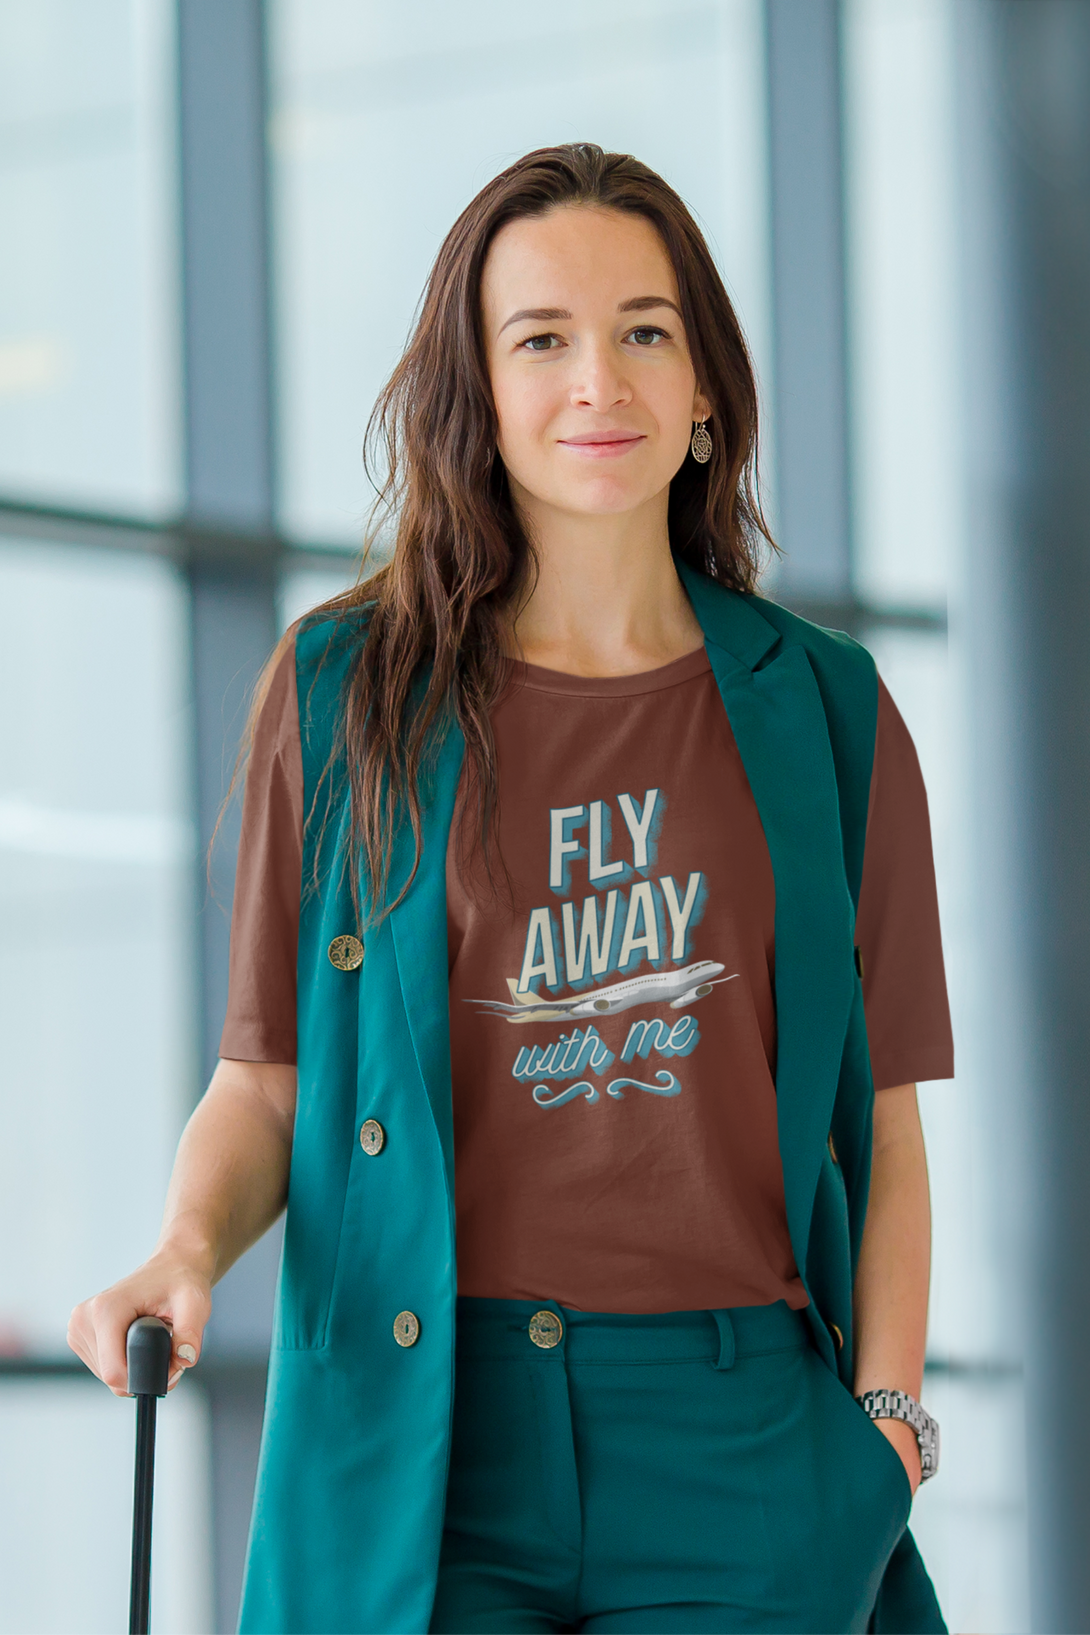 Fly Away With Me Printed T-Shirt For Women - WowWaves - 4